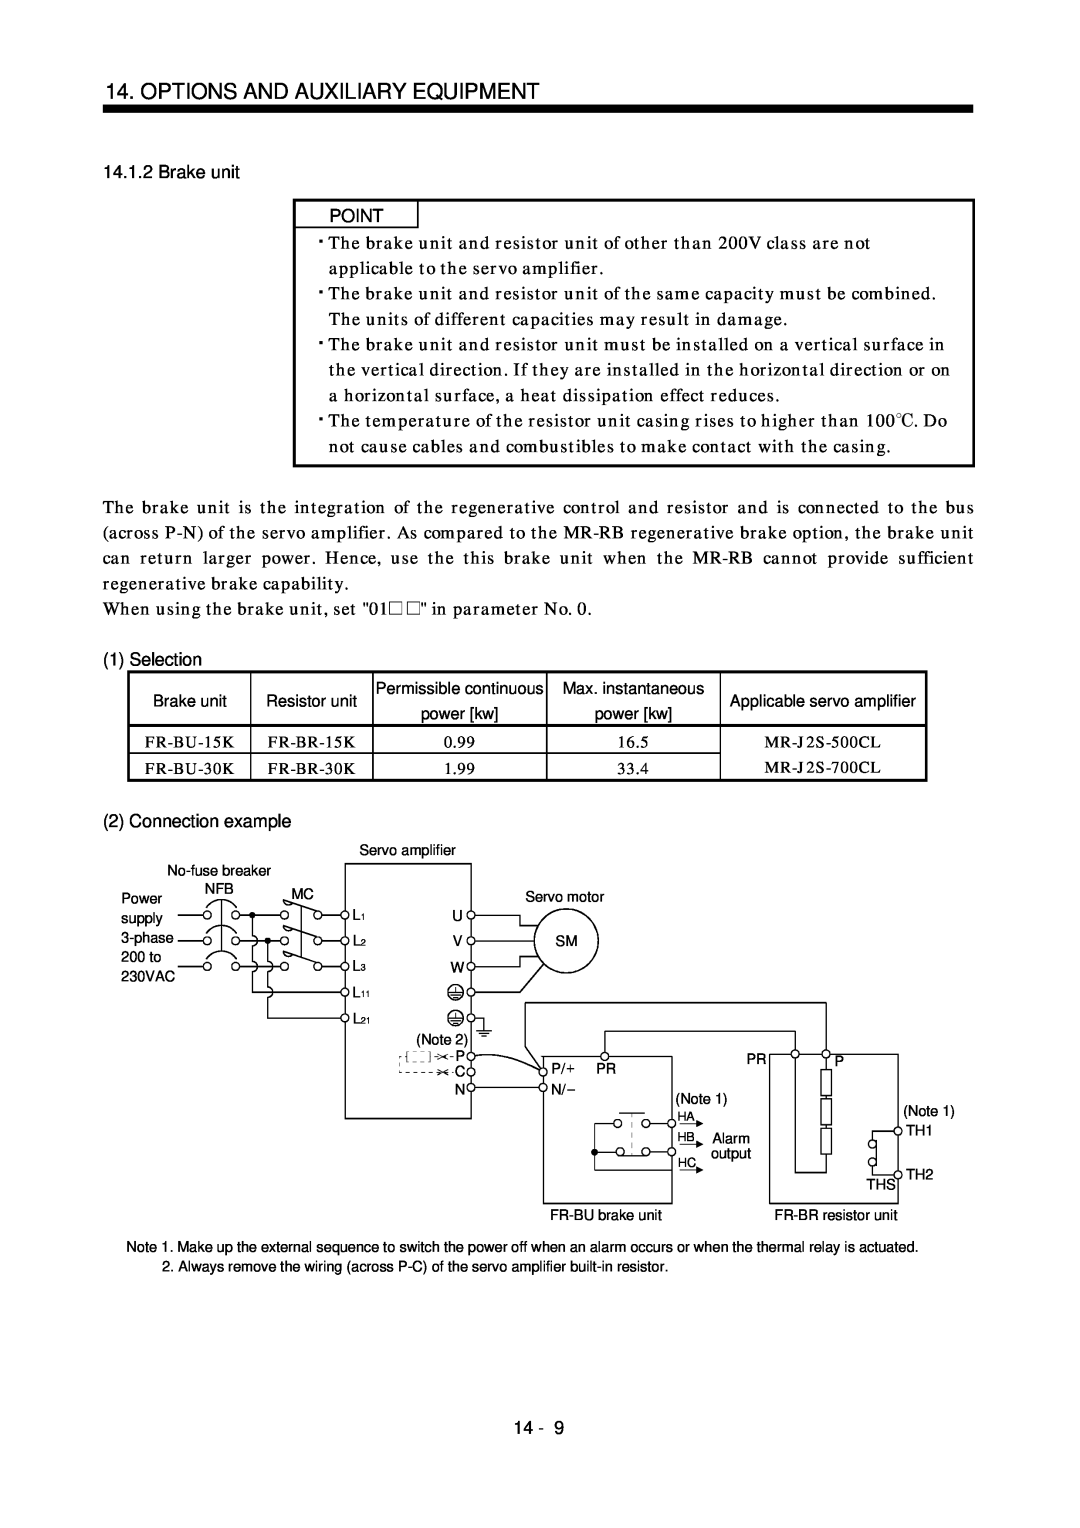 Mitsubishi Electronics MR-J2S- CL Brake unit POINT, Selection, Connection example, Options And Auxiliary Equipment, 14 